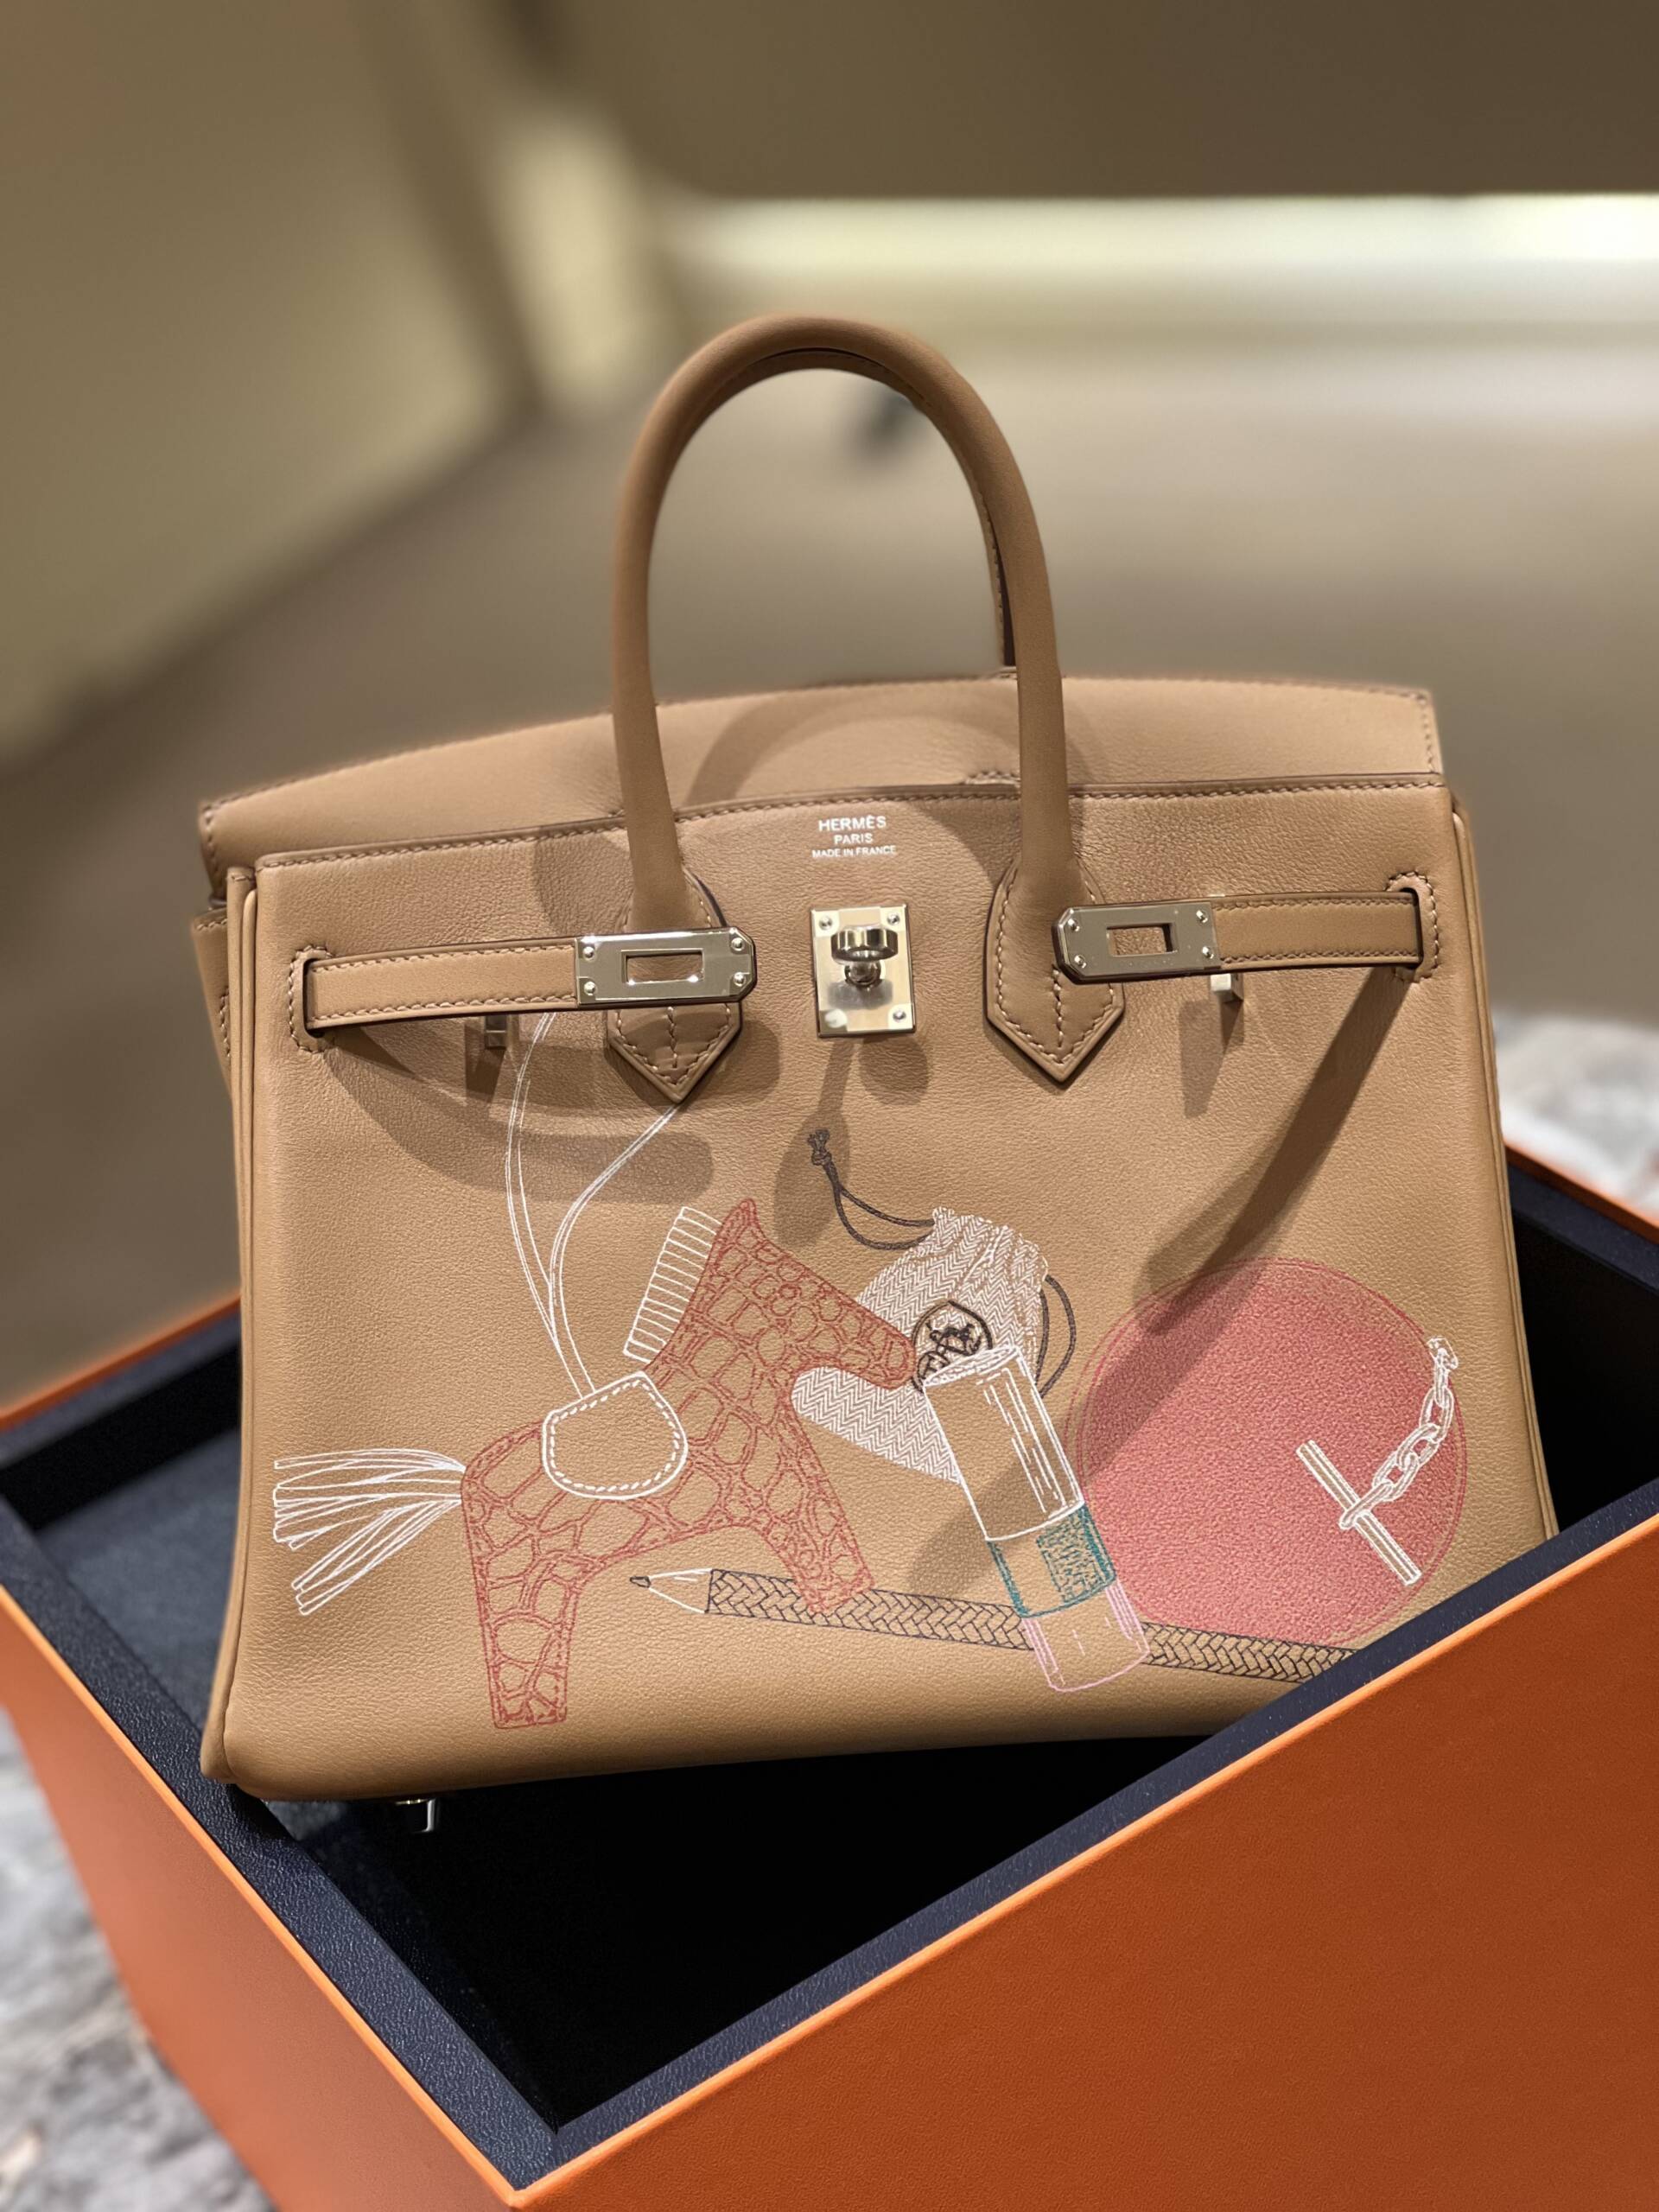 Alternative to Hermes Kelly Sellier? / My first impressions on my